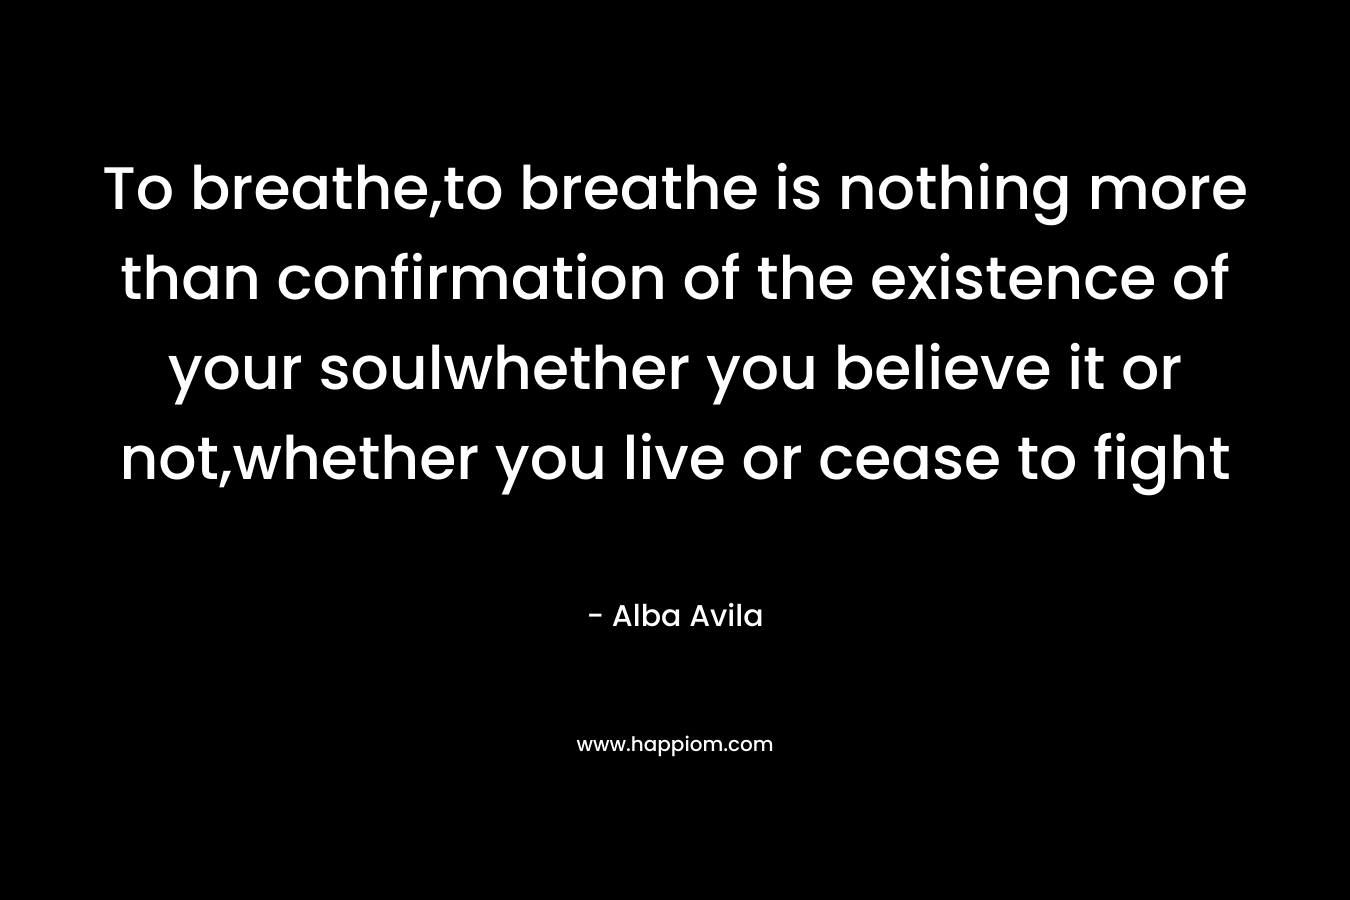 To breathe,to breathe is nothing more than confirmation of the existence of your soulwhether you believe it or not,whether you live or cease to fight